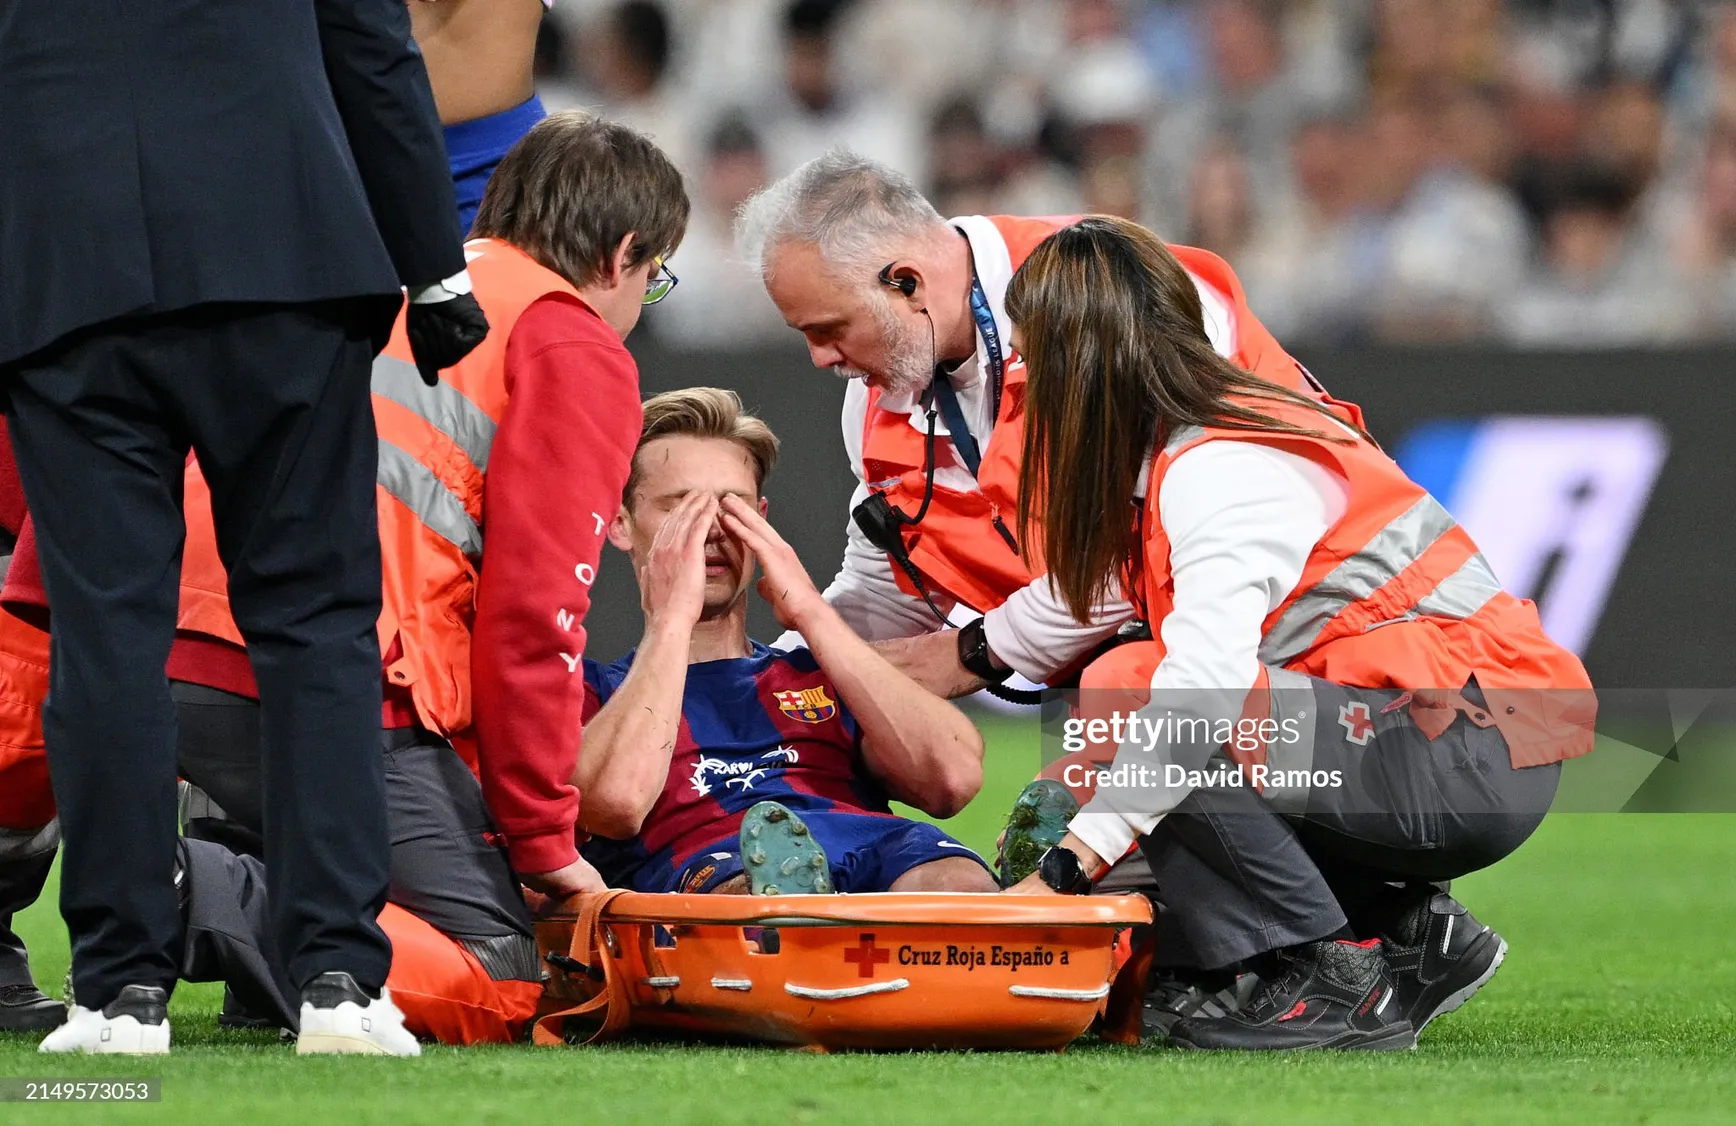 Frankie de Jong had to leave the field after an ankle injury in El-Clasico | sportzpoint.com